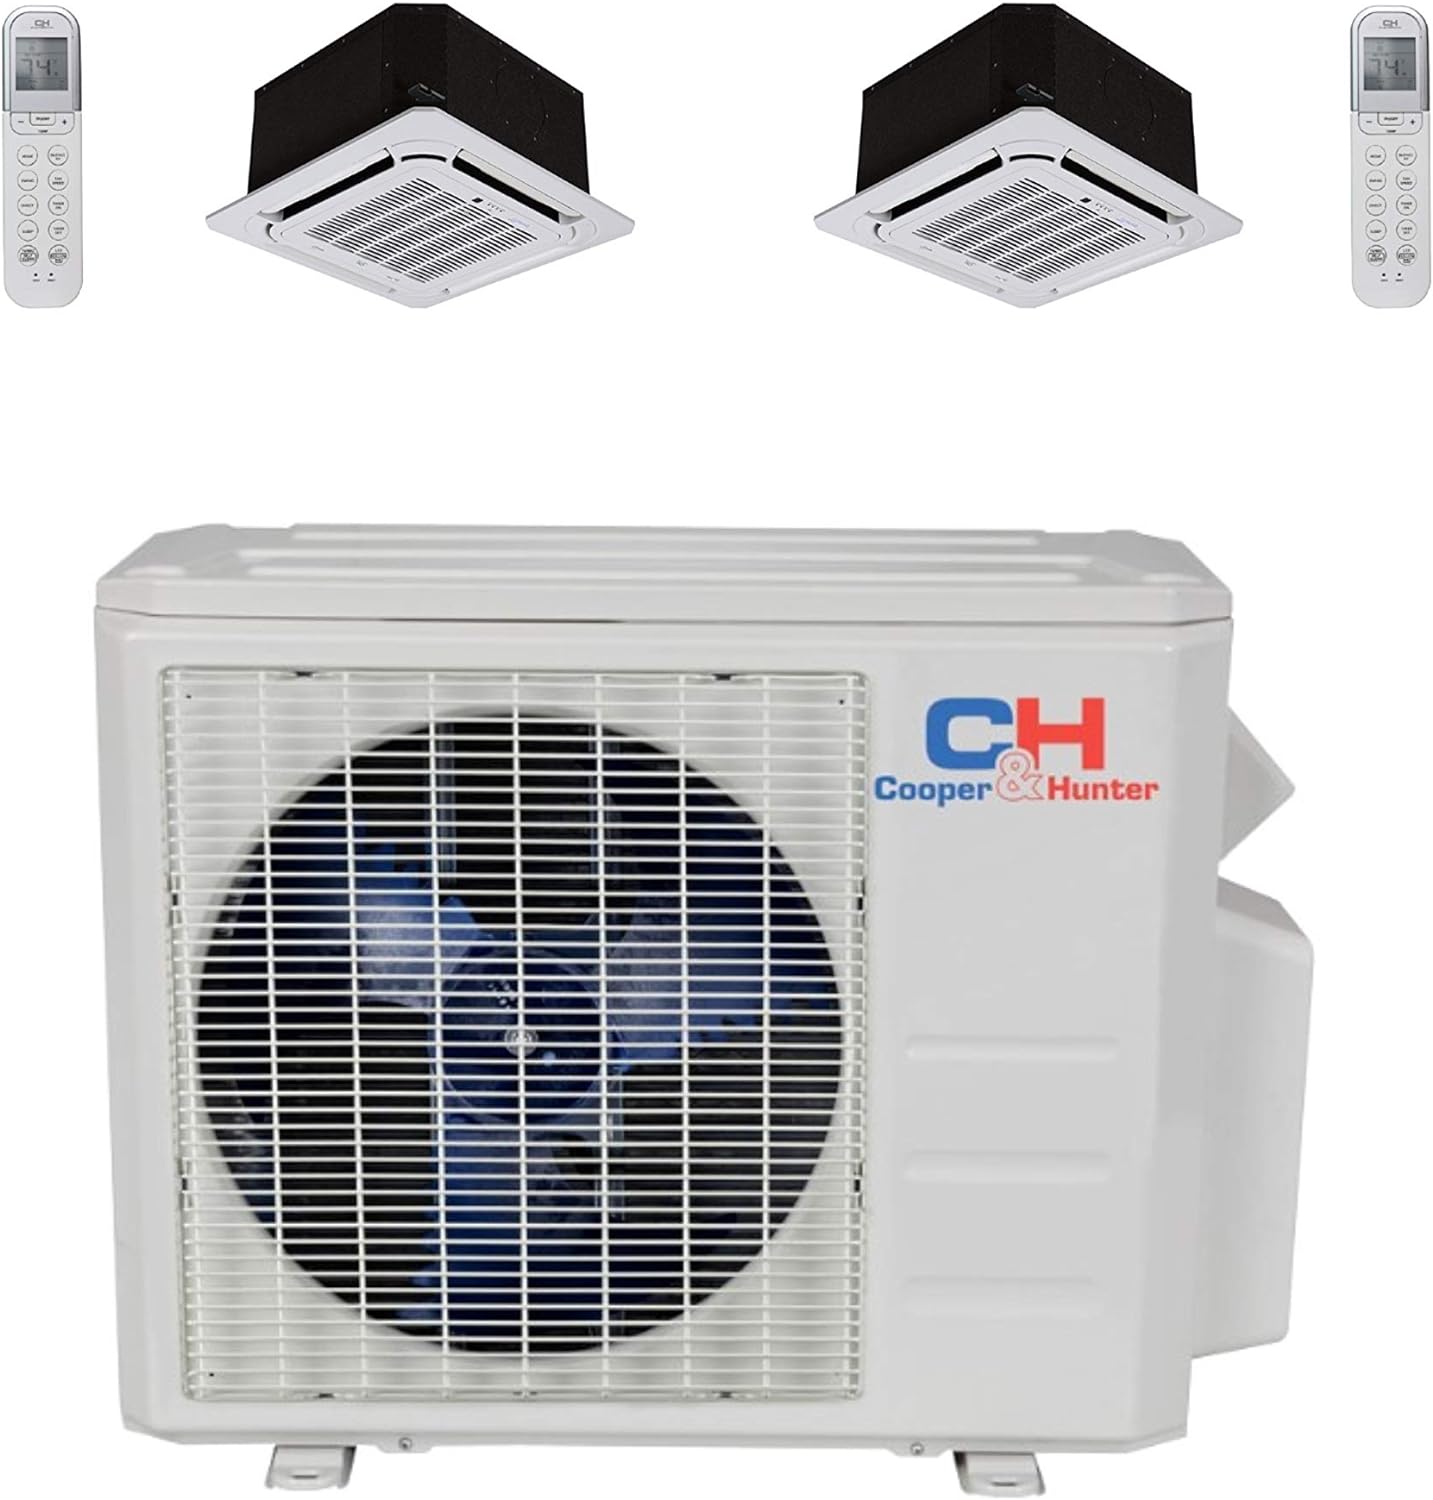 COOPER AND HUNTER Dual 2 Zone Ductless Mini Split Air Conditioner Ceiling Cassette Heat Pump 12000 12000